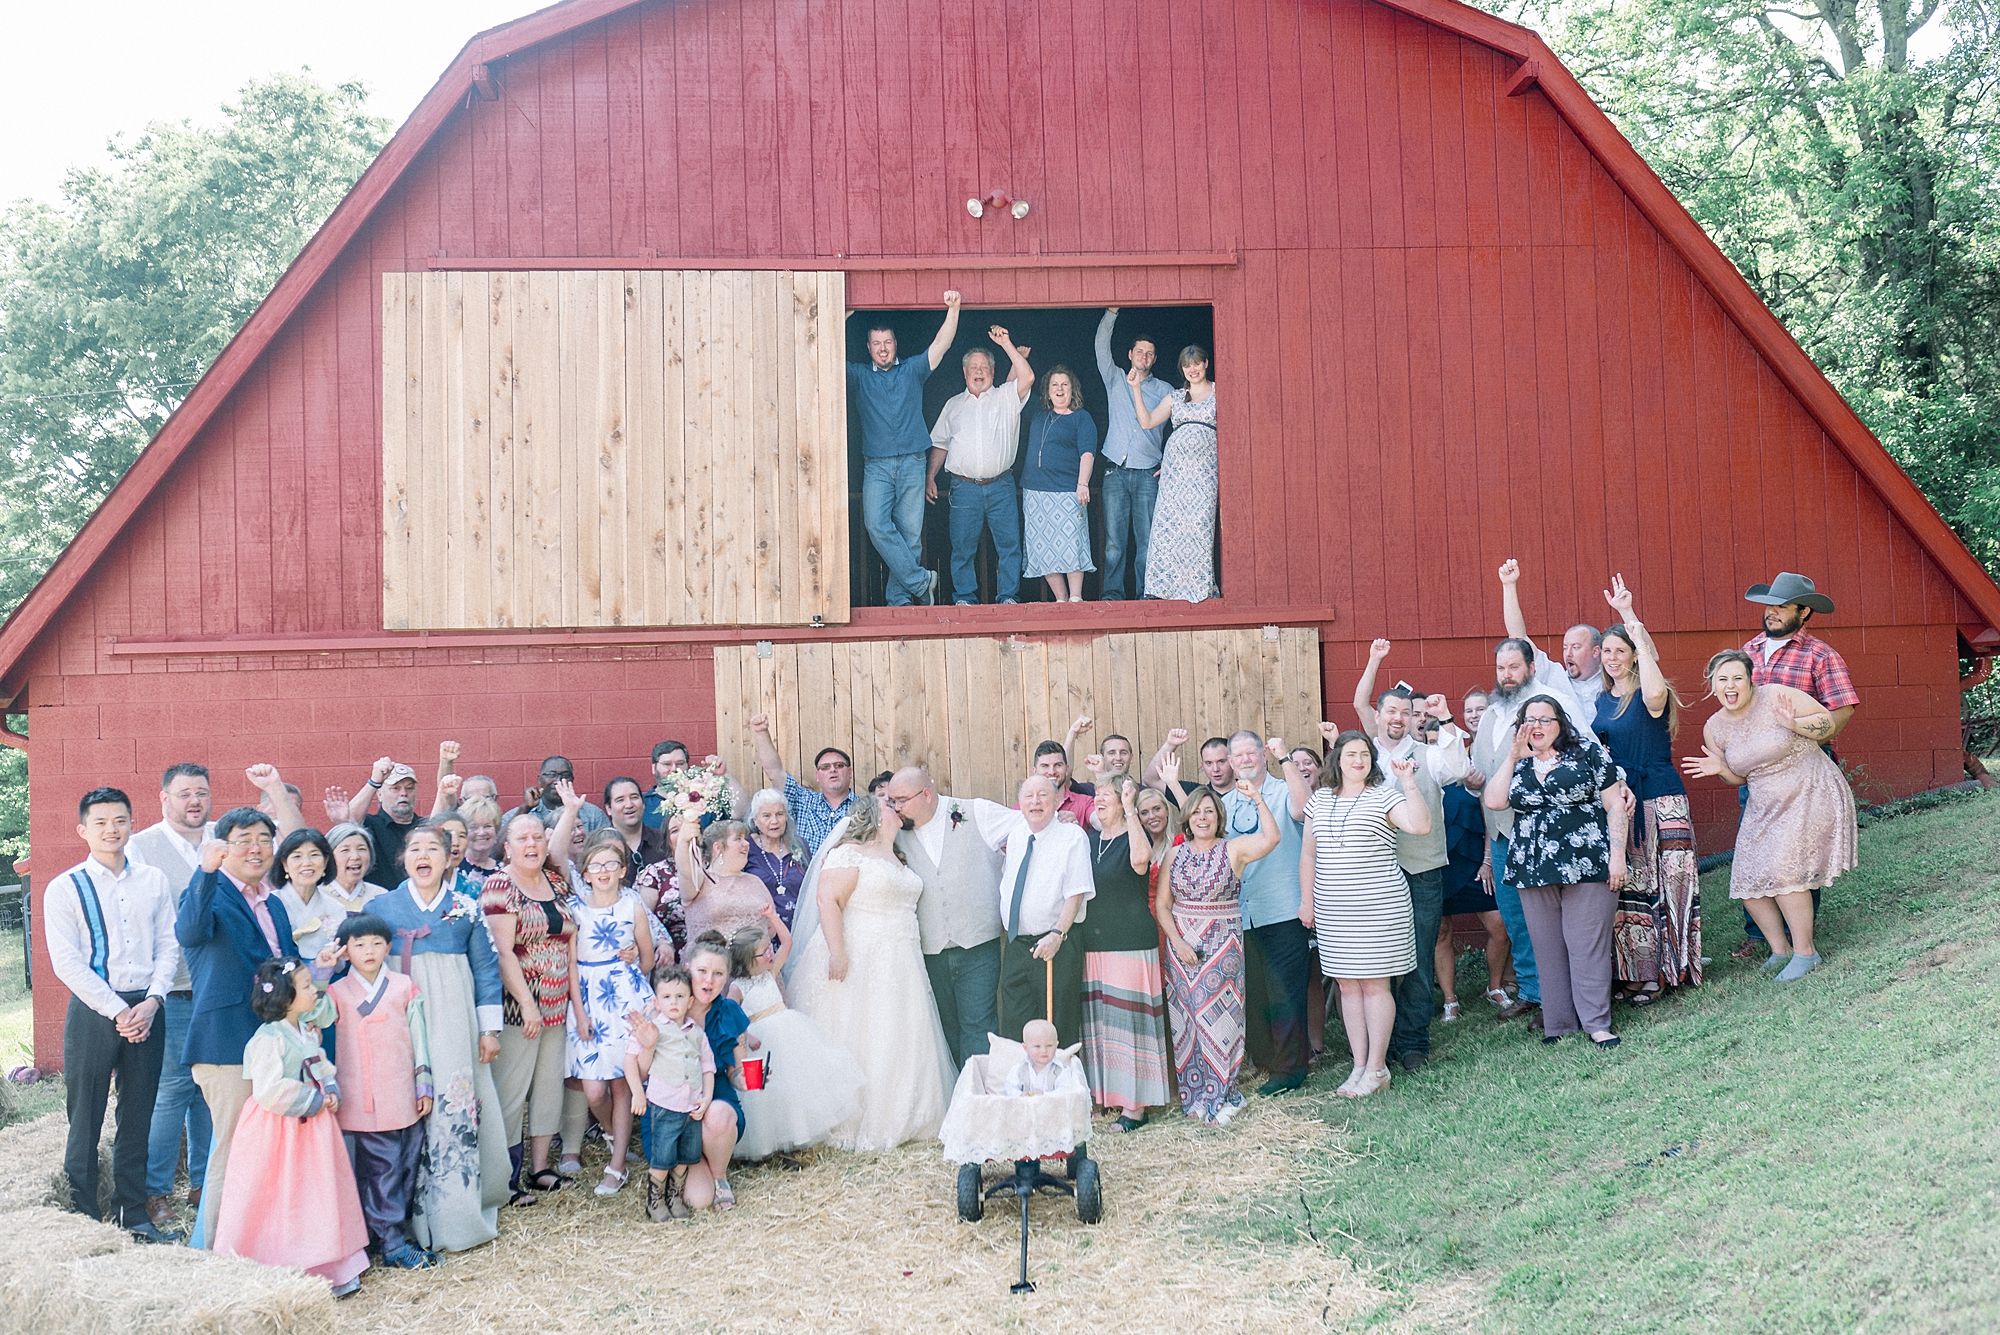 Wedding Day Details The Entire Wedding Party in Nashville Tennessee by Dolly DeLong Photography